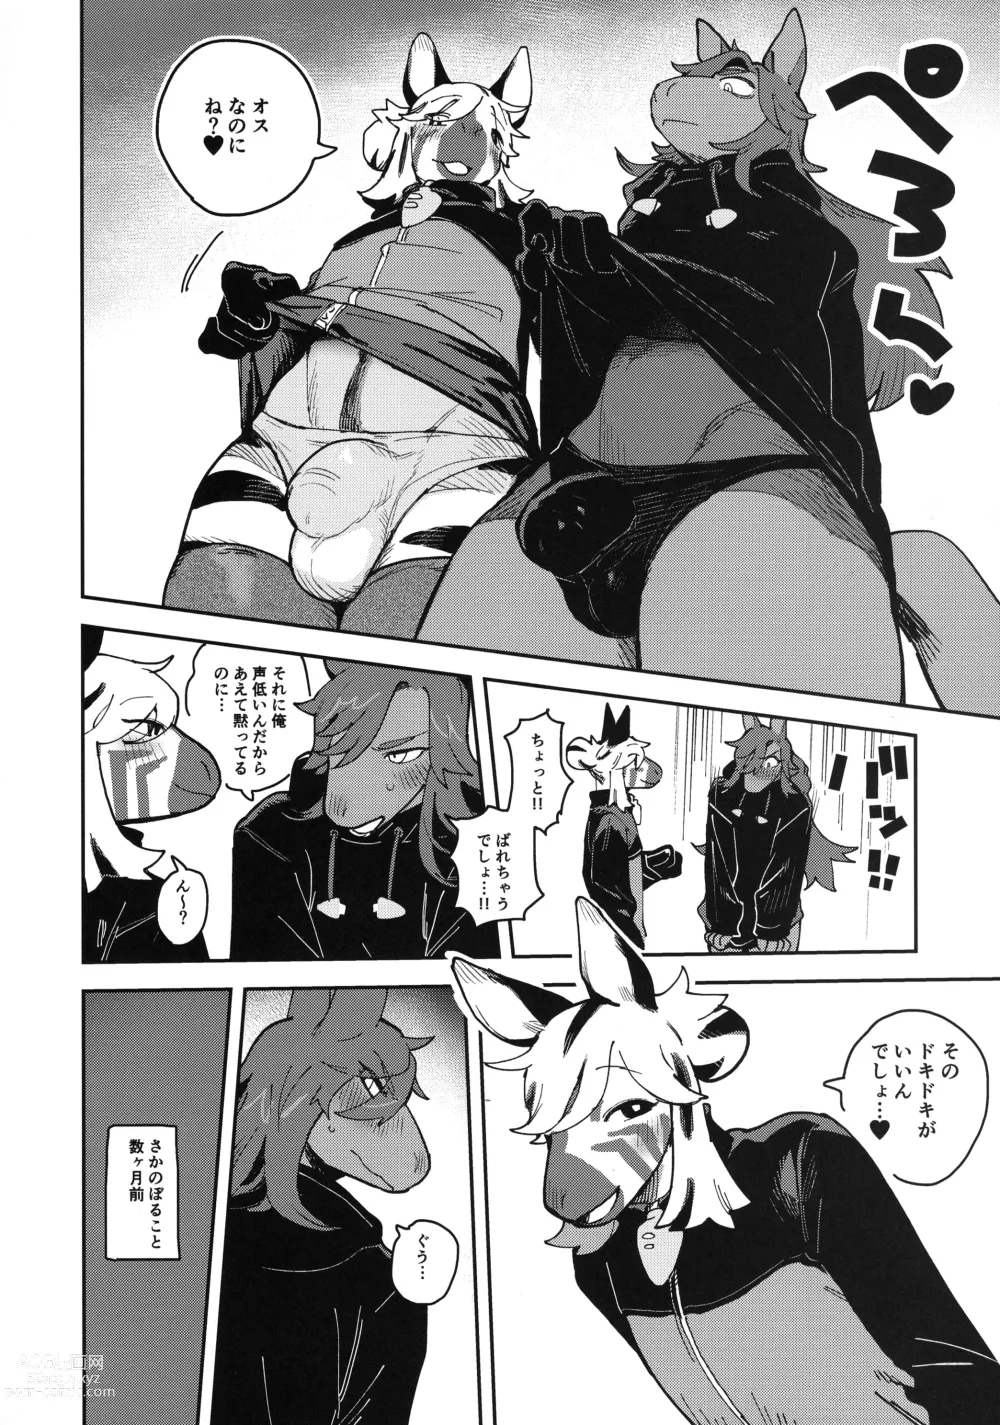 Page 6 of doujinshi HORNY HORSE